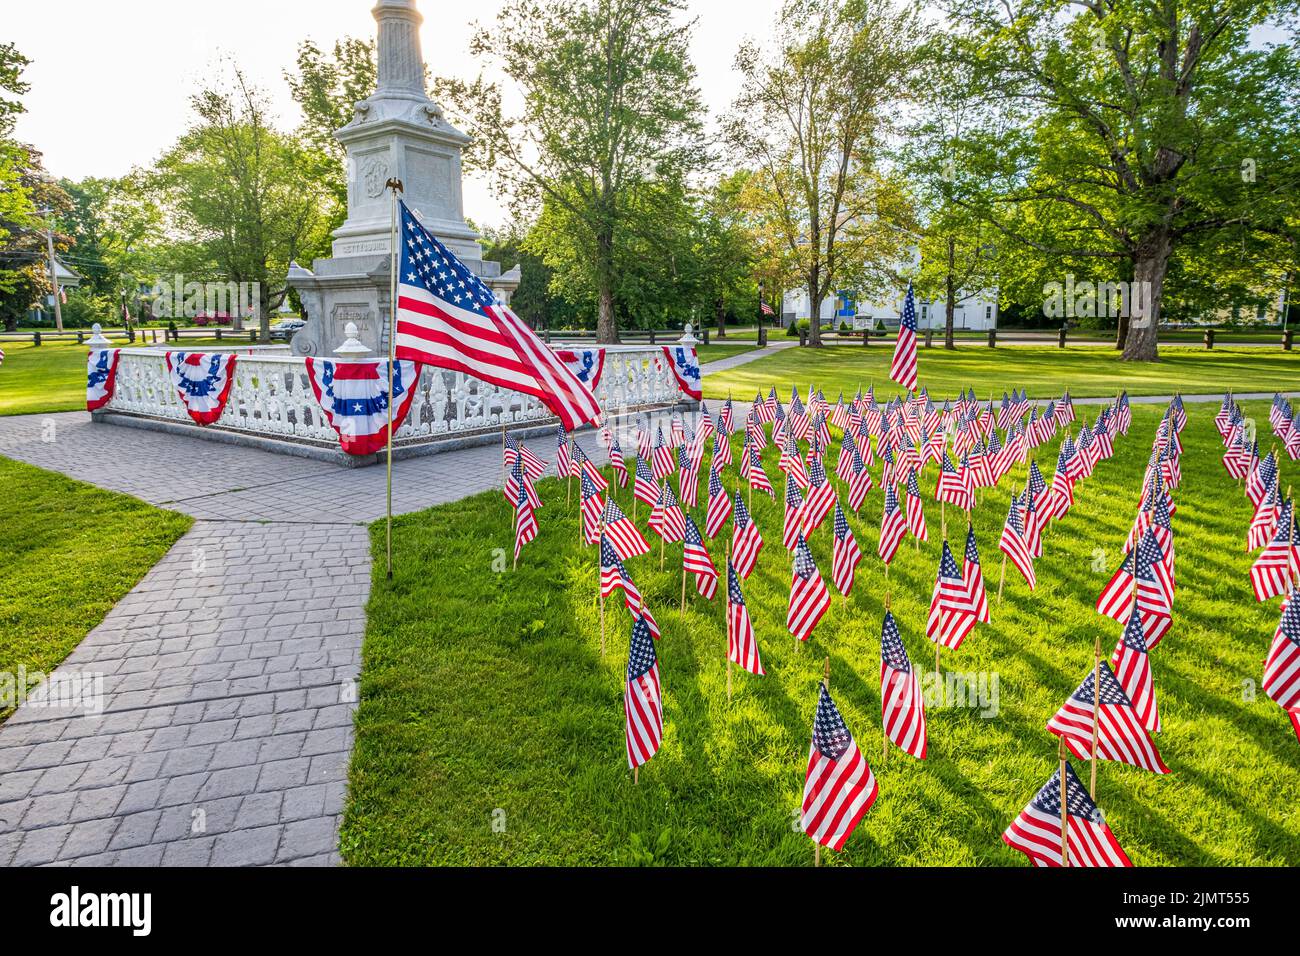 American flags decorate the Civil War Monument on the Barre, MA Town Common Stock Photo